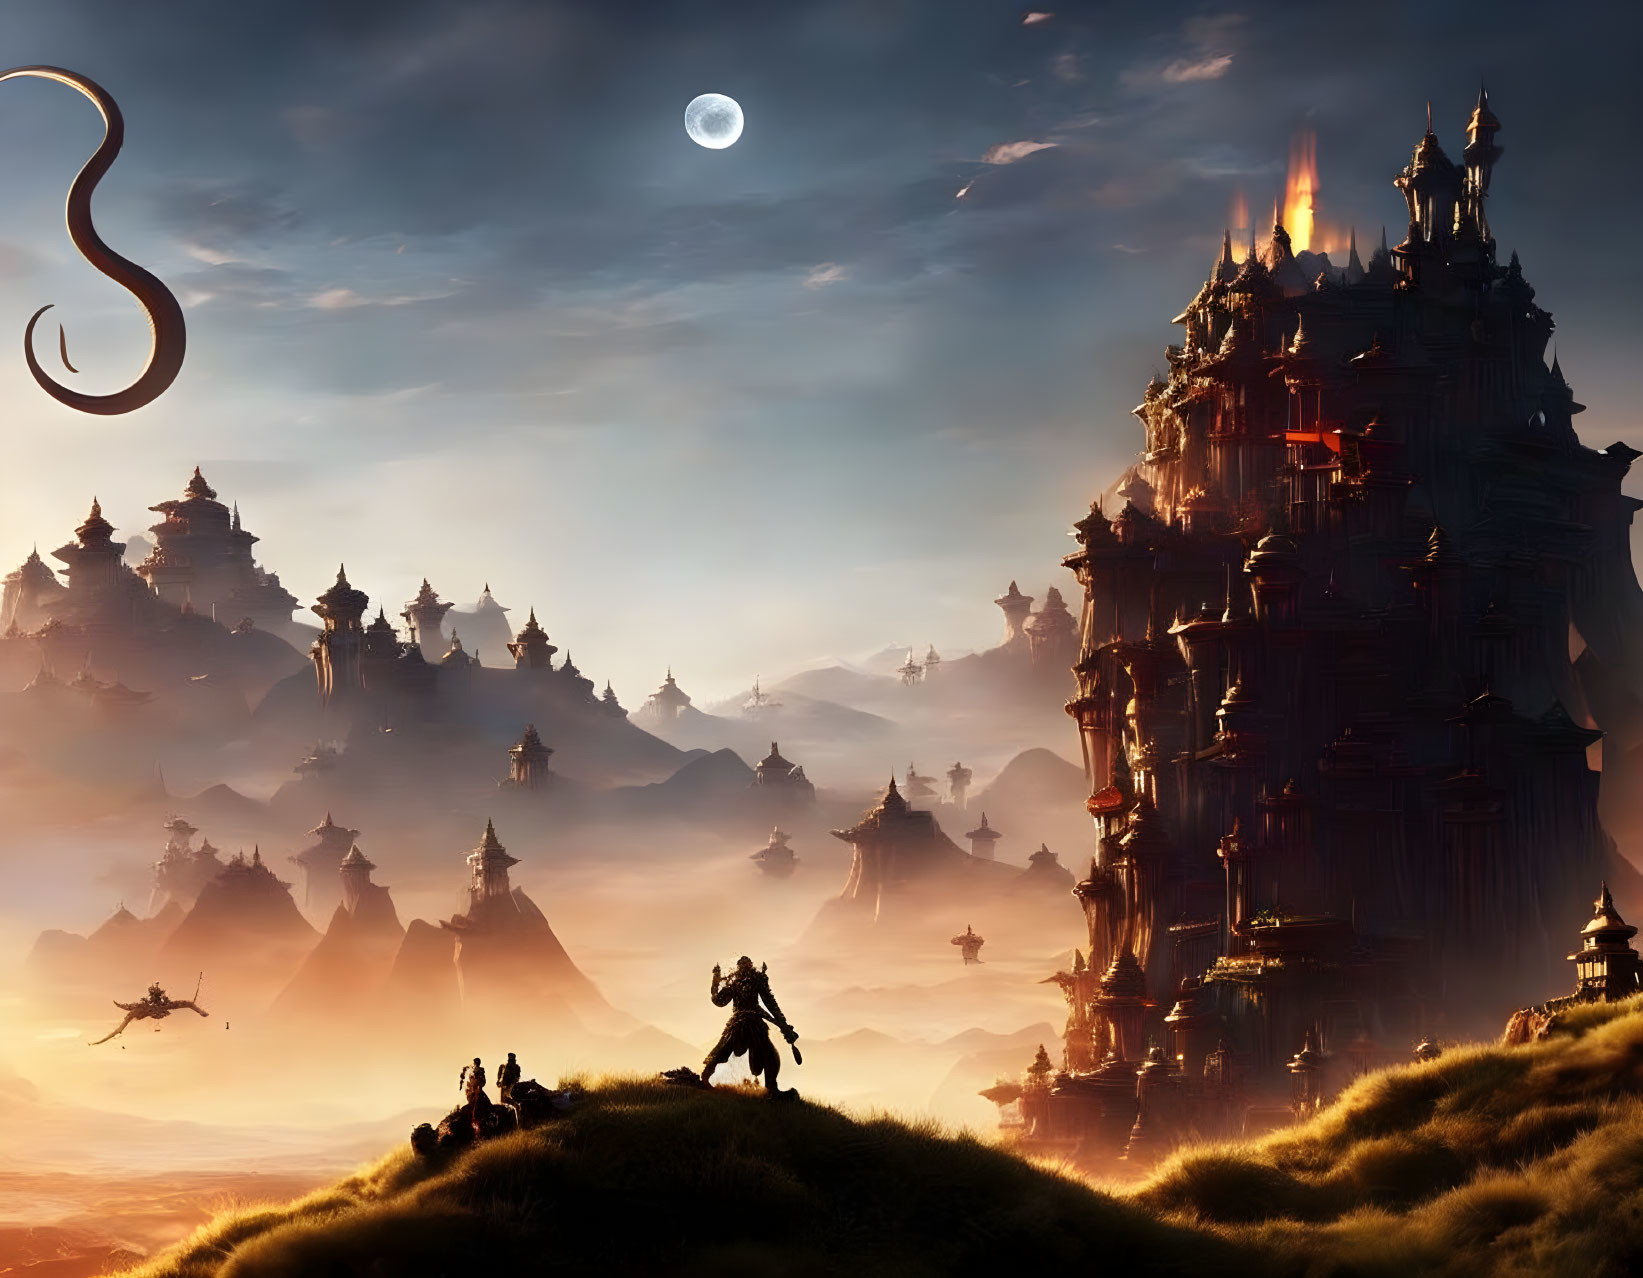 Majestic fantasy landscape with castle, horse rider, adventurers, flying ships, and moonlit sky